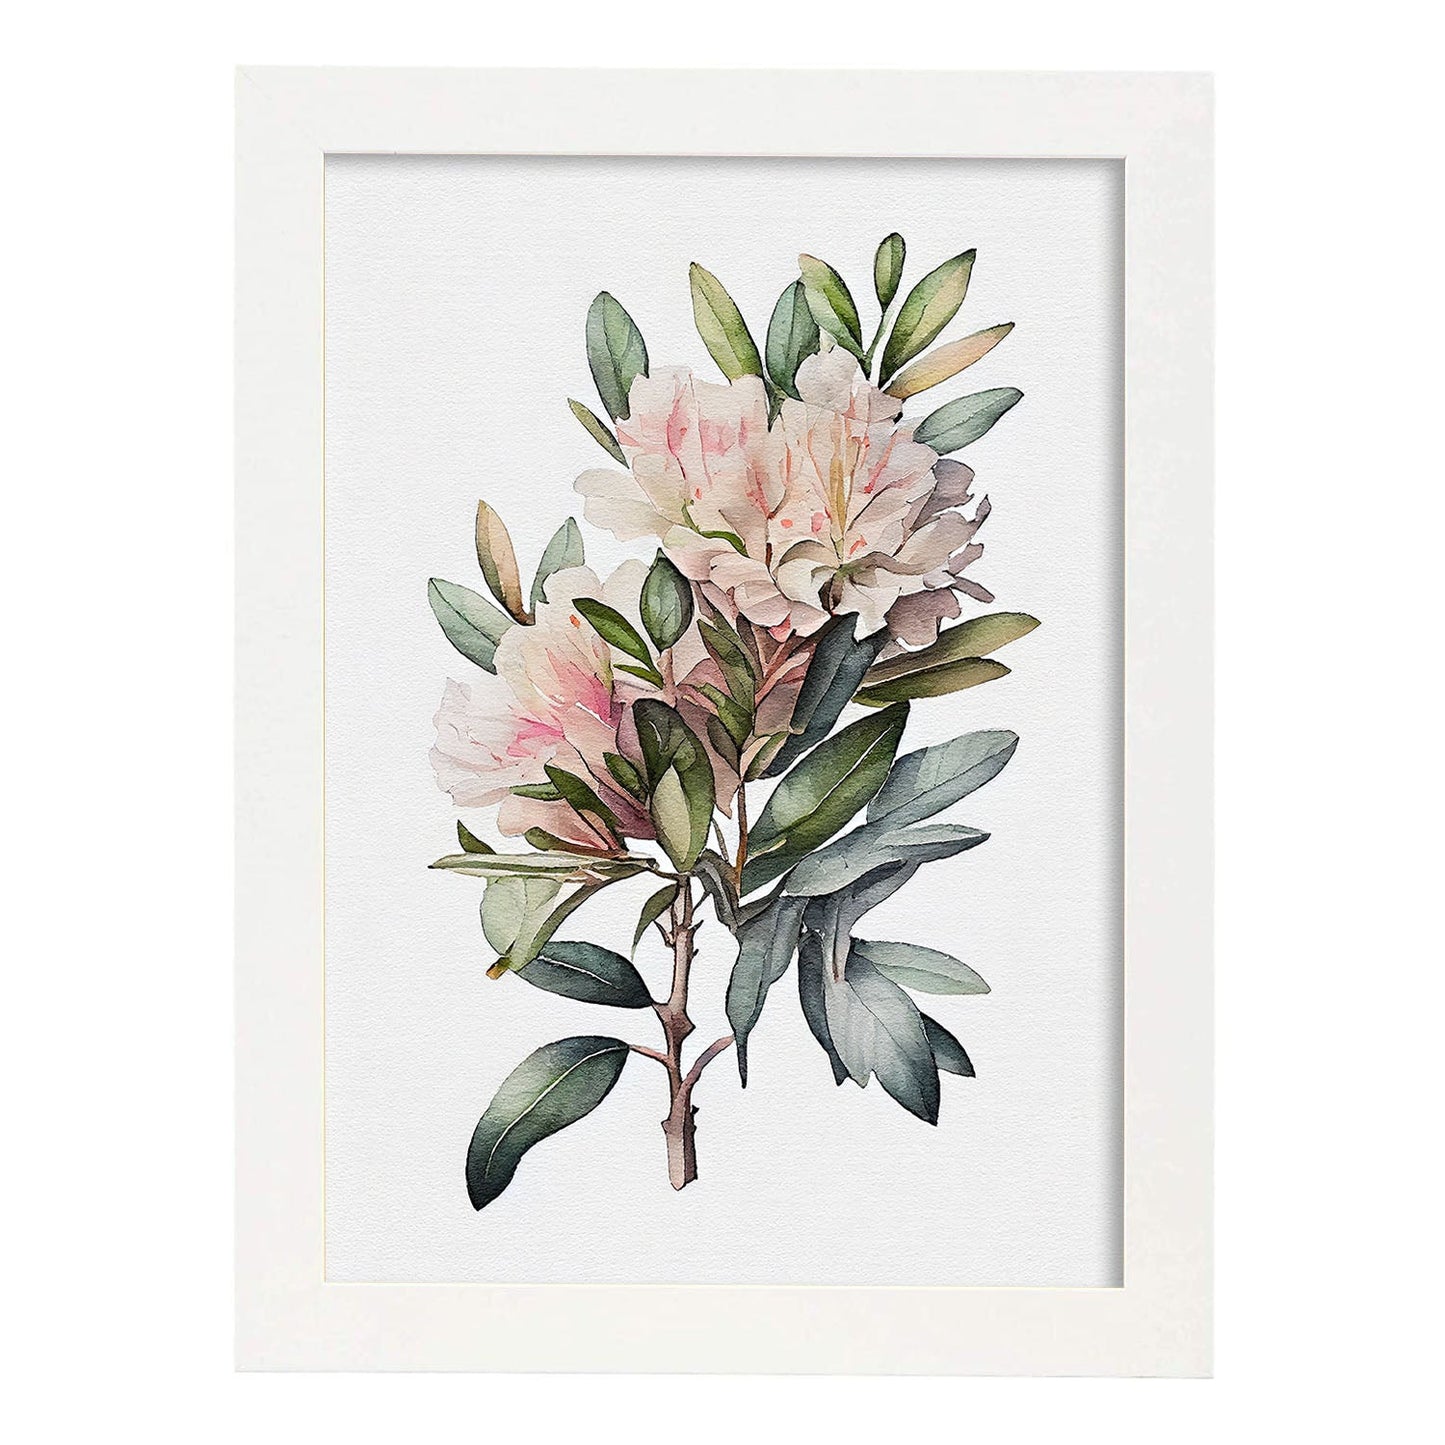 Nacnic watercolor minmal Rhododendron_2. Aesthetic Wall Art Prints for Bedroom or Living Room Design.-Artwork-Nacnic-A4-Marco Blanco-Nacnic Estudio SL